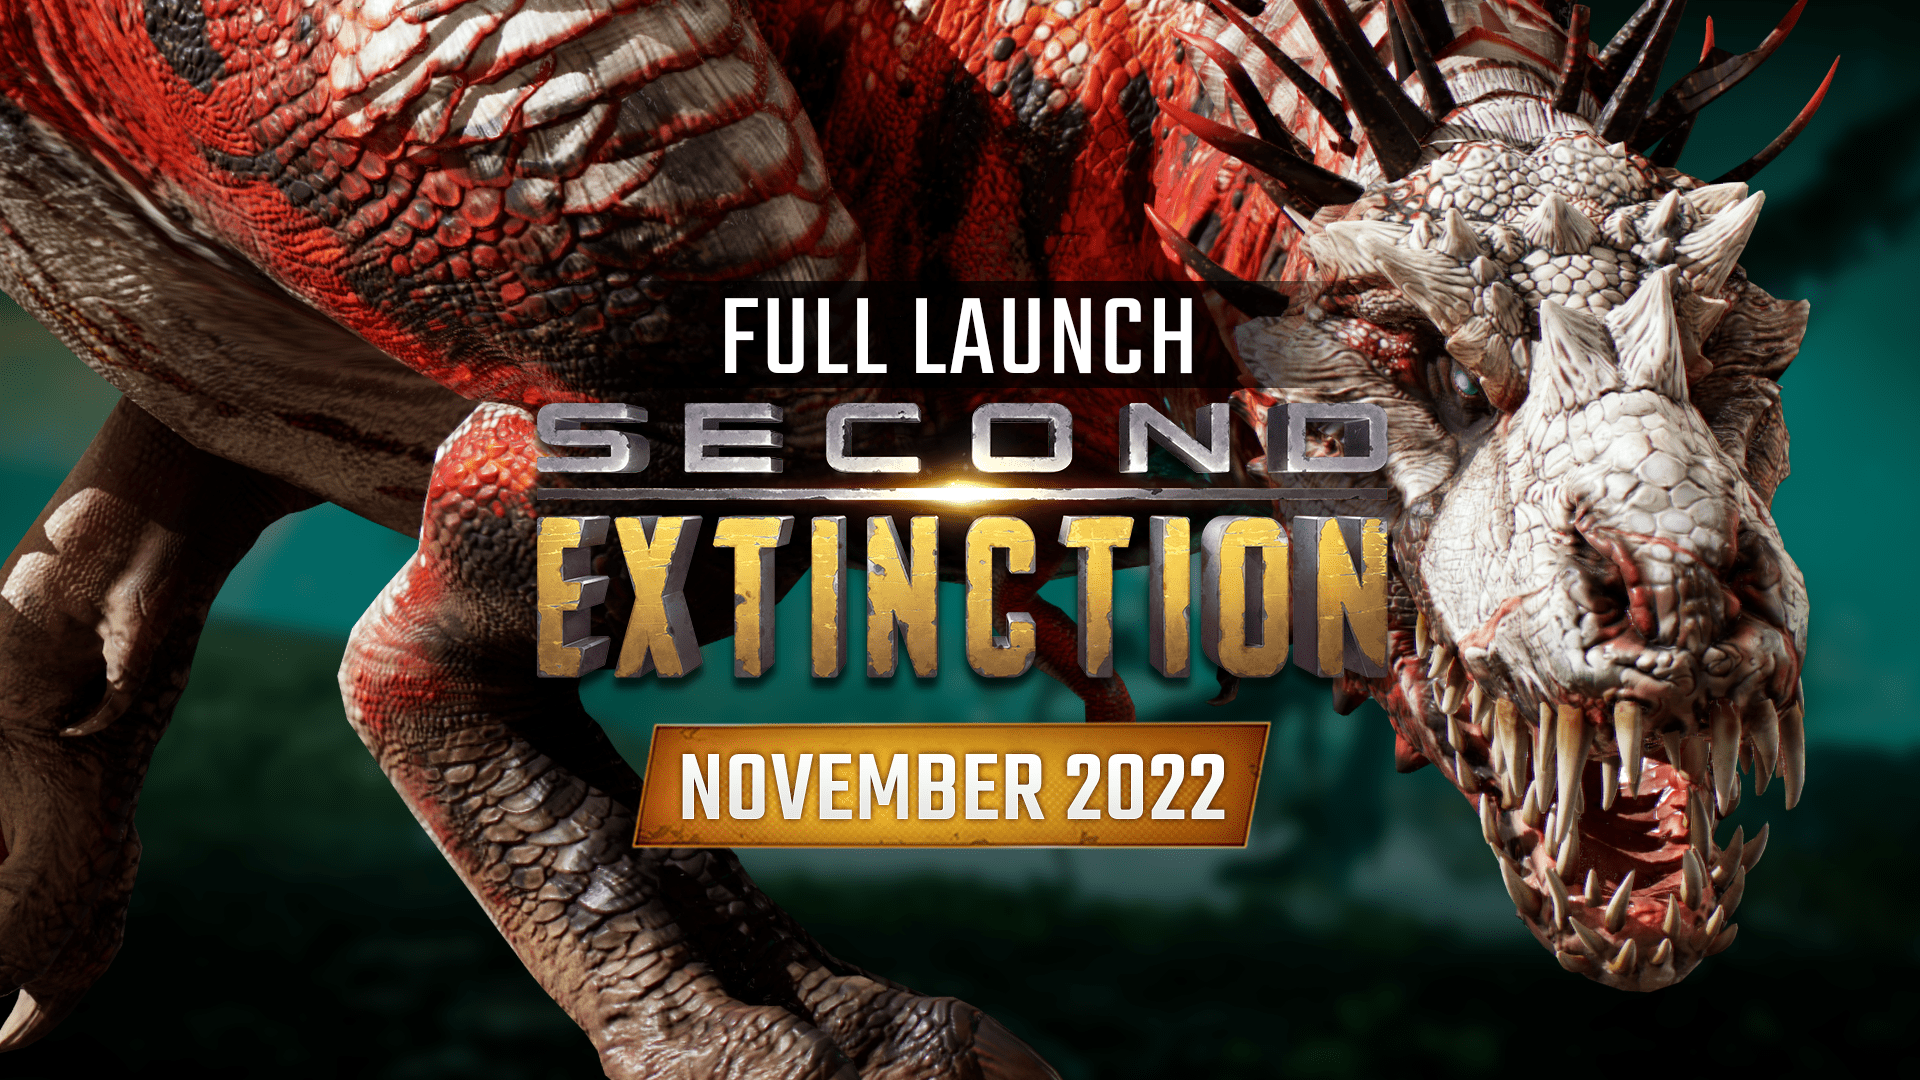 Full Launch coming in November 2022